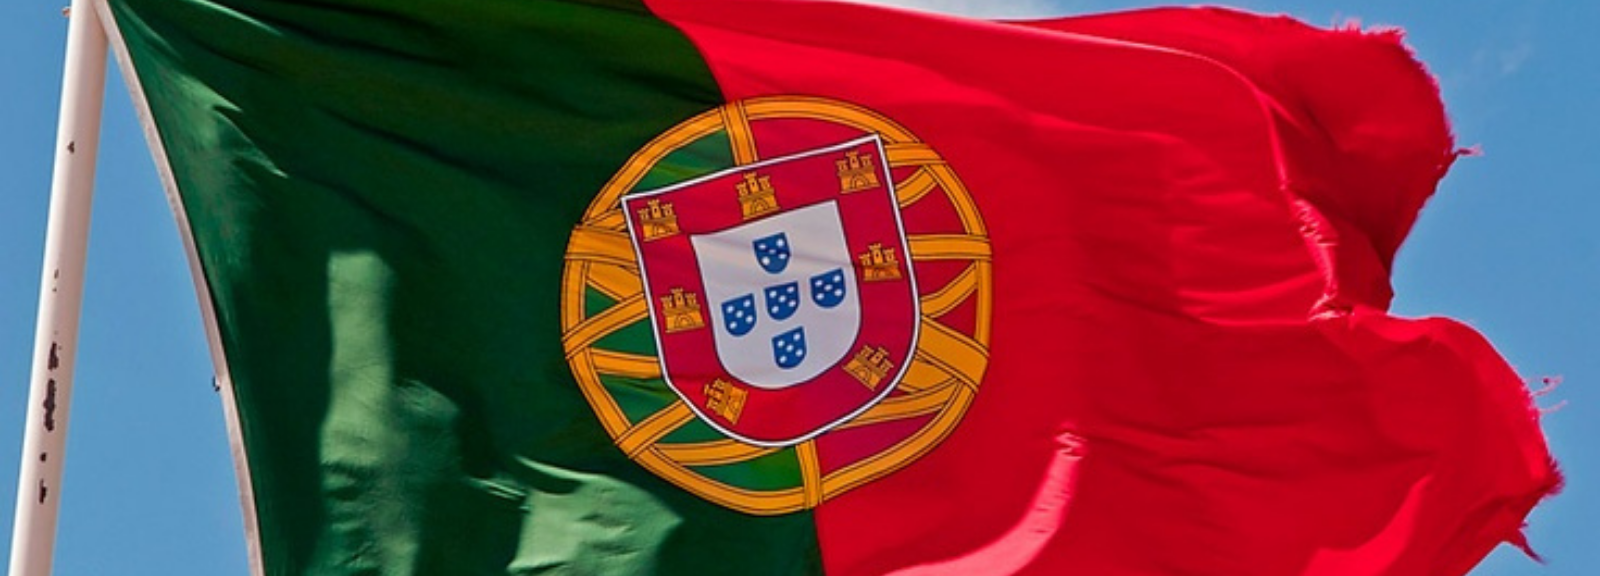 A flag of Portugal.